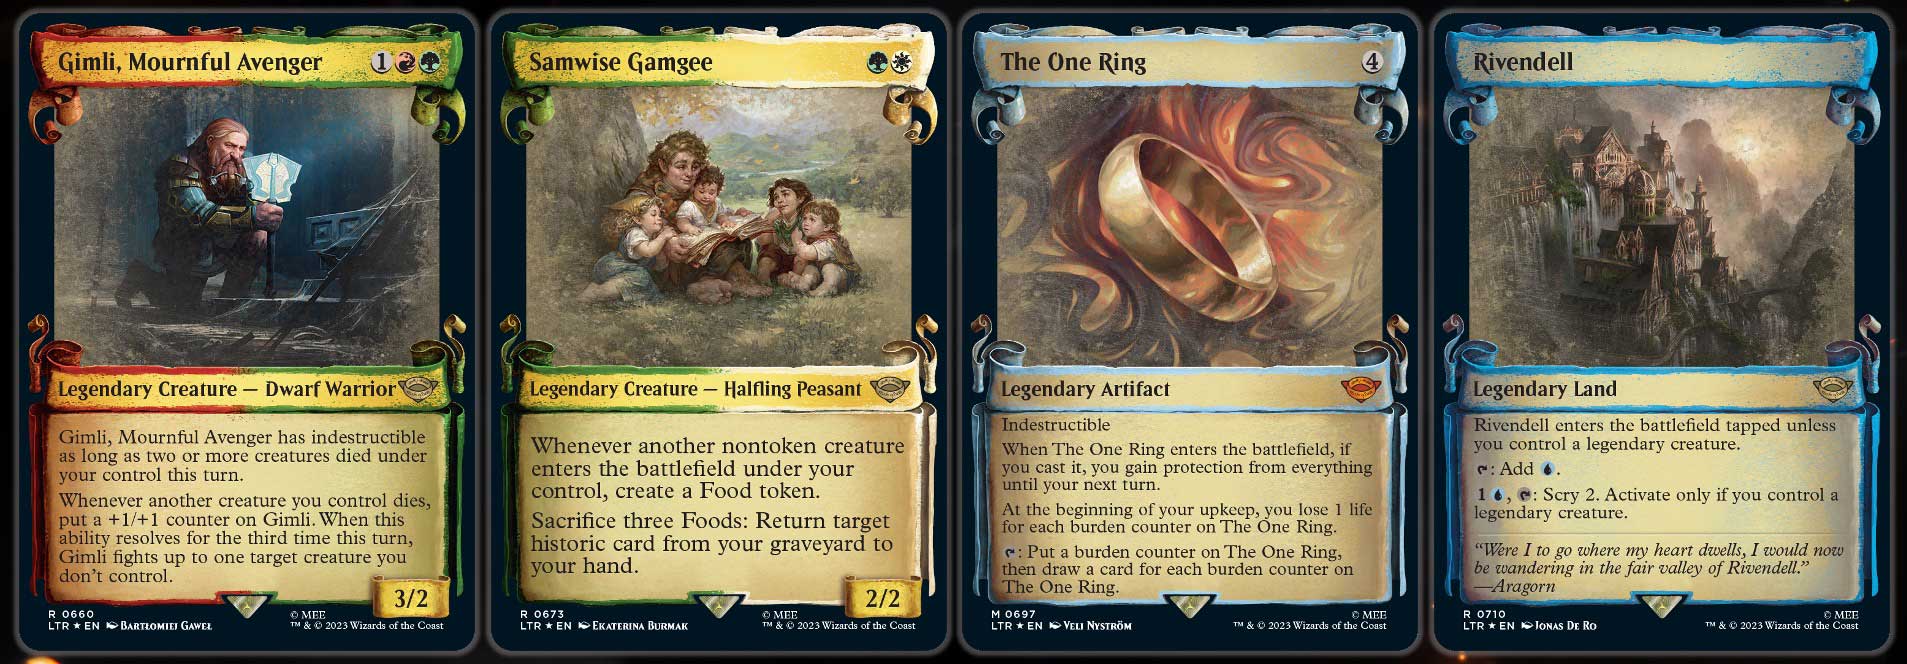 ICv2: 'Magic: The Gathering' 'LotR' Holiday Release Product Deets Revealed